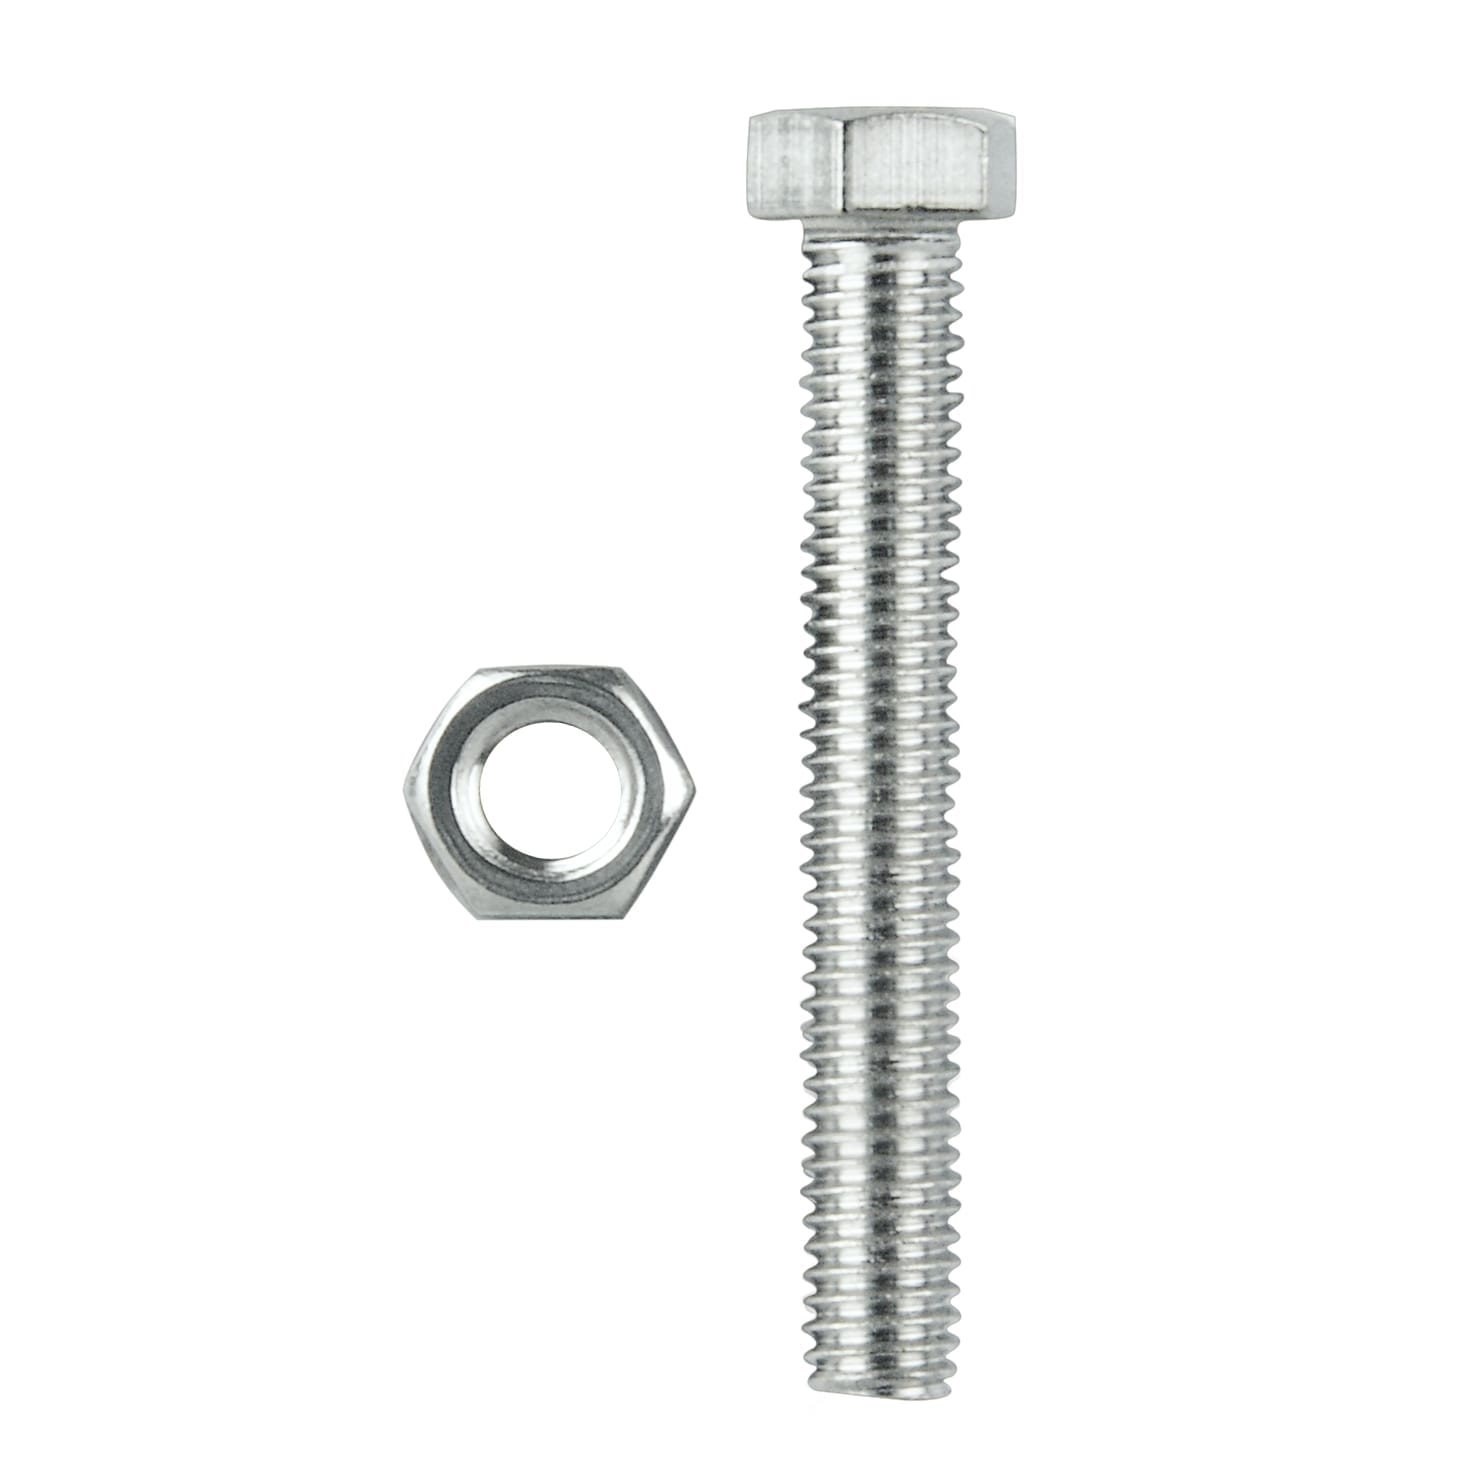 HEX BOLTS & NUTS M12 x 75MM STAINLESS STEEL 316